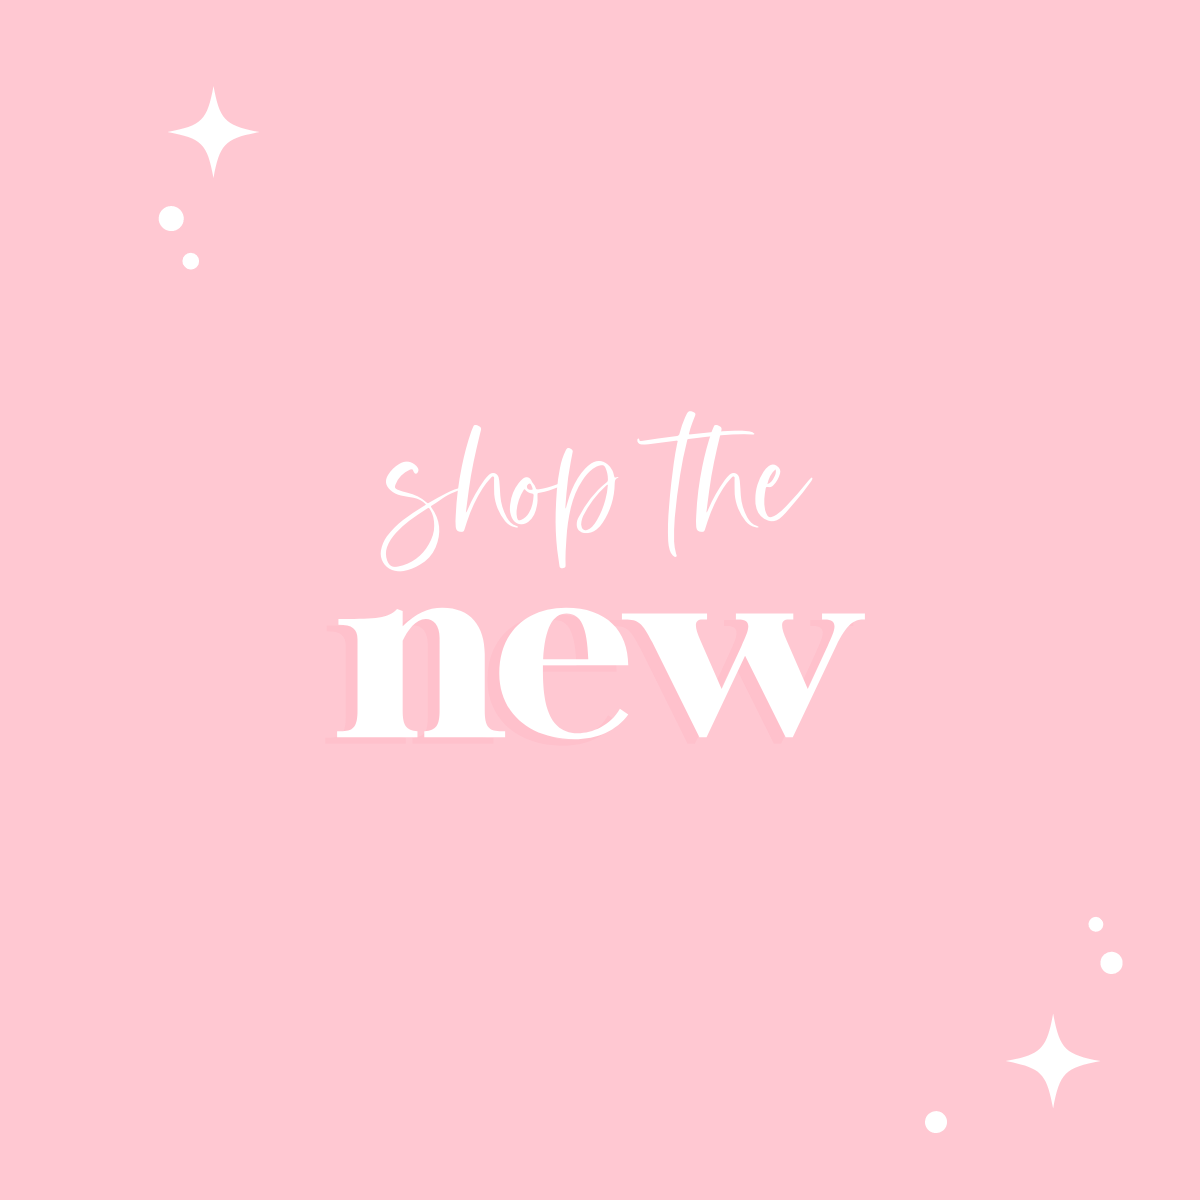 shop the new